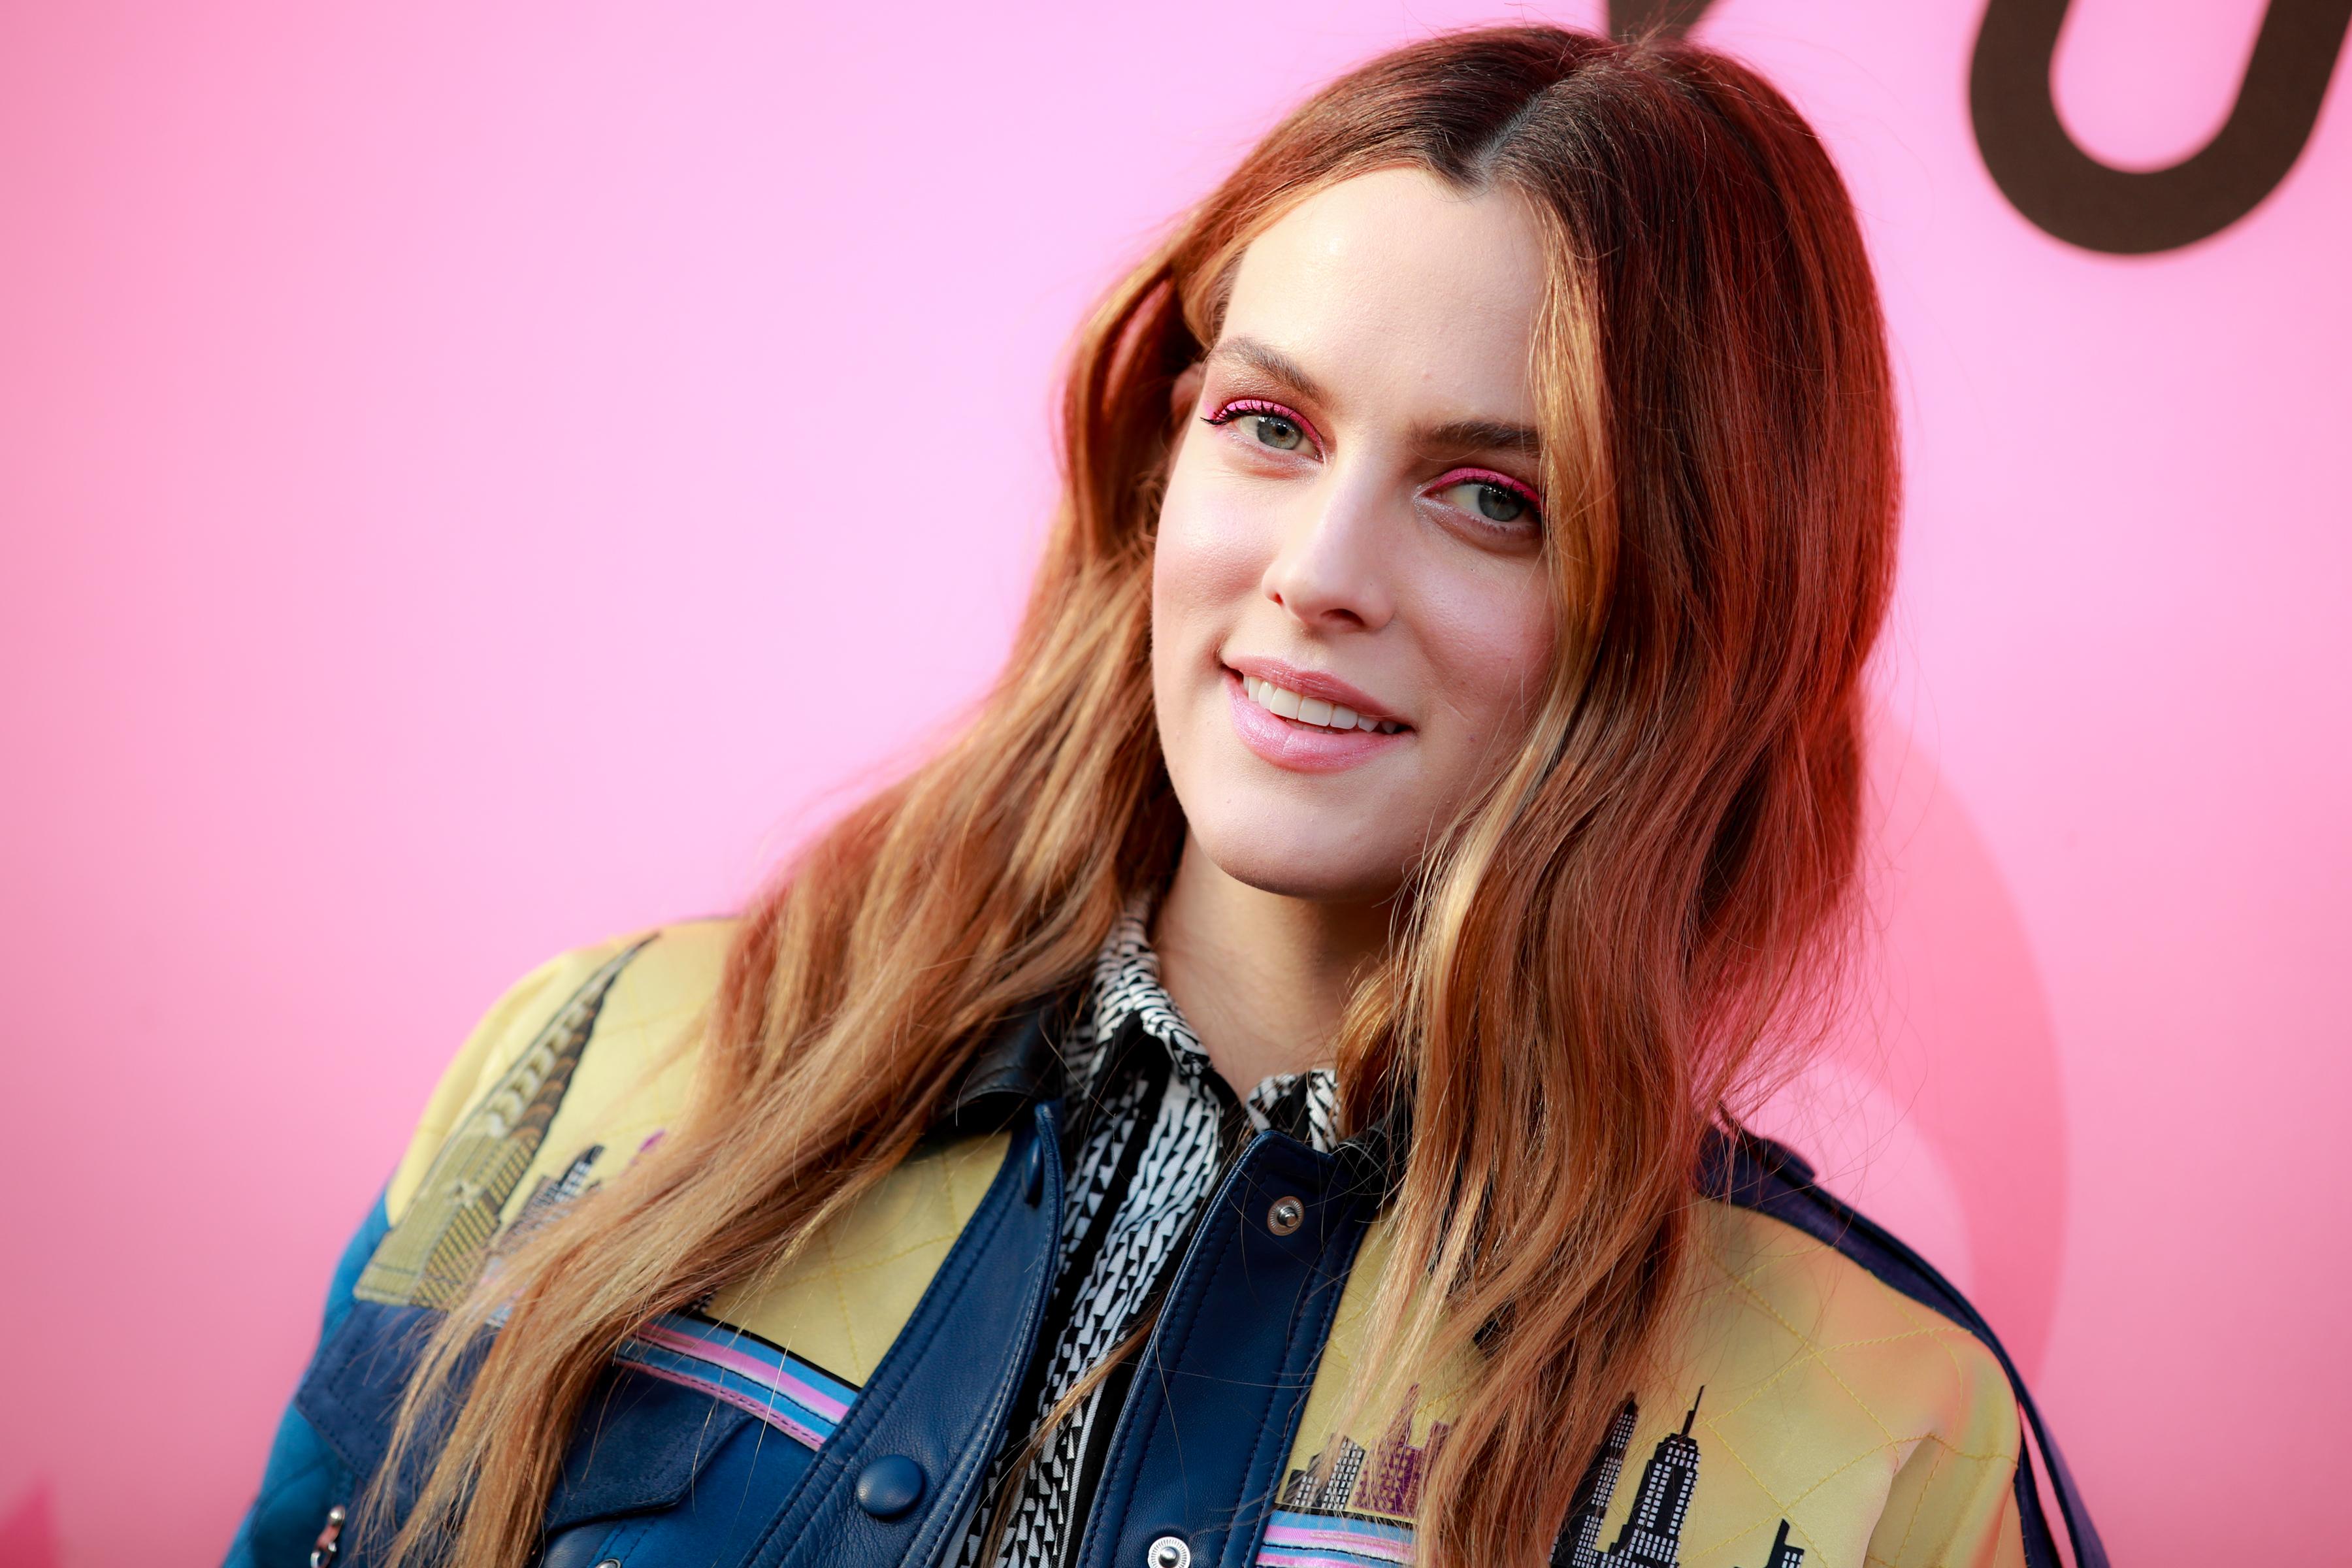 Being A Rockstar Runs In The Family: Riley Keough’s 3 Defining Career Roles